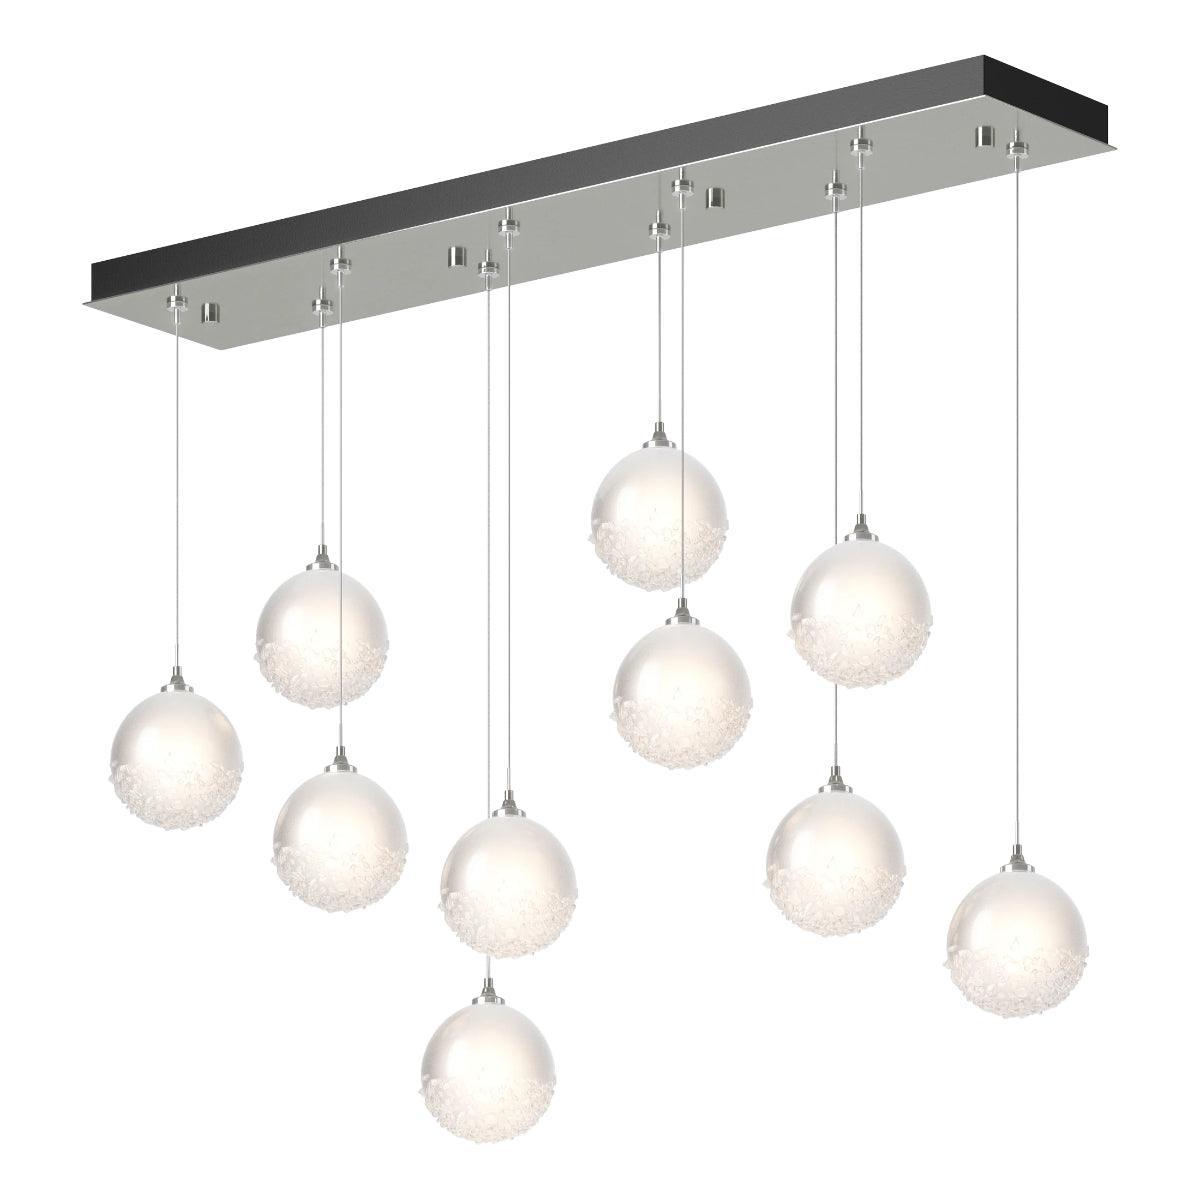 Fritz 45 in. 10 lights Linear Pendant Light with Long Height